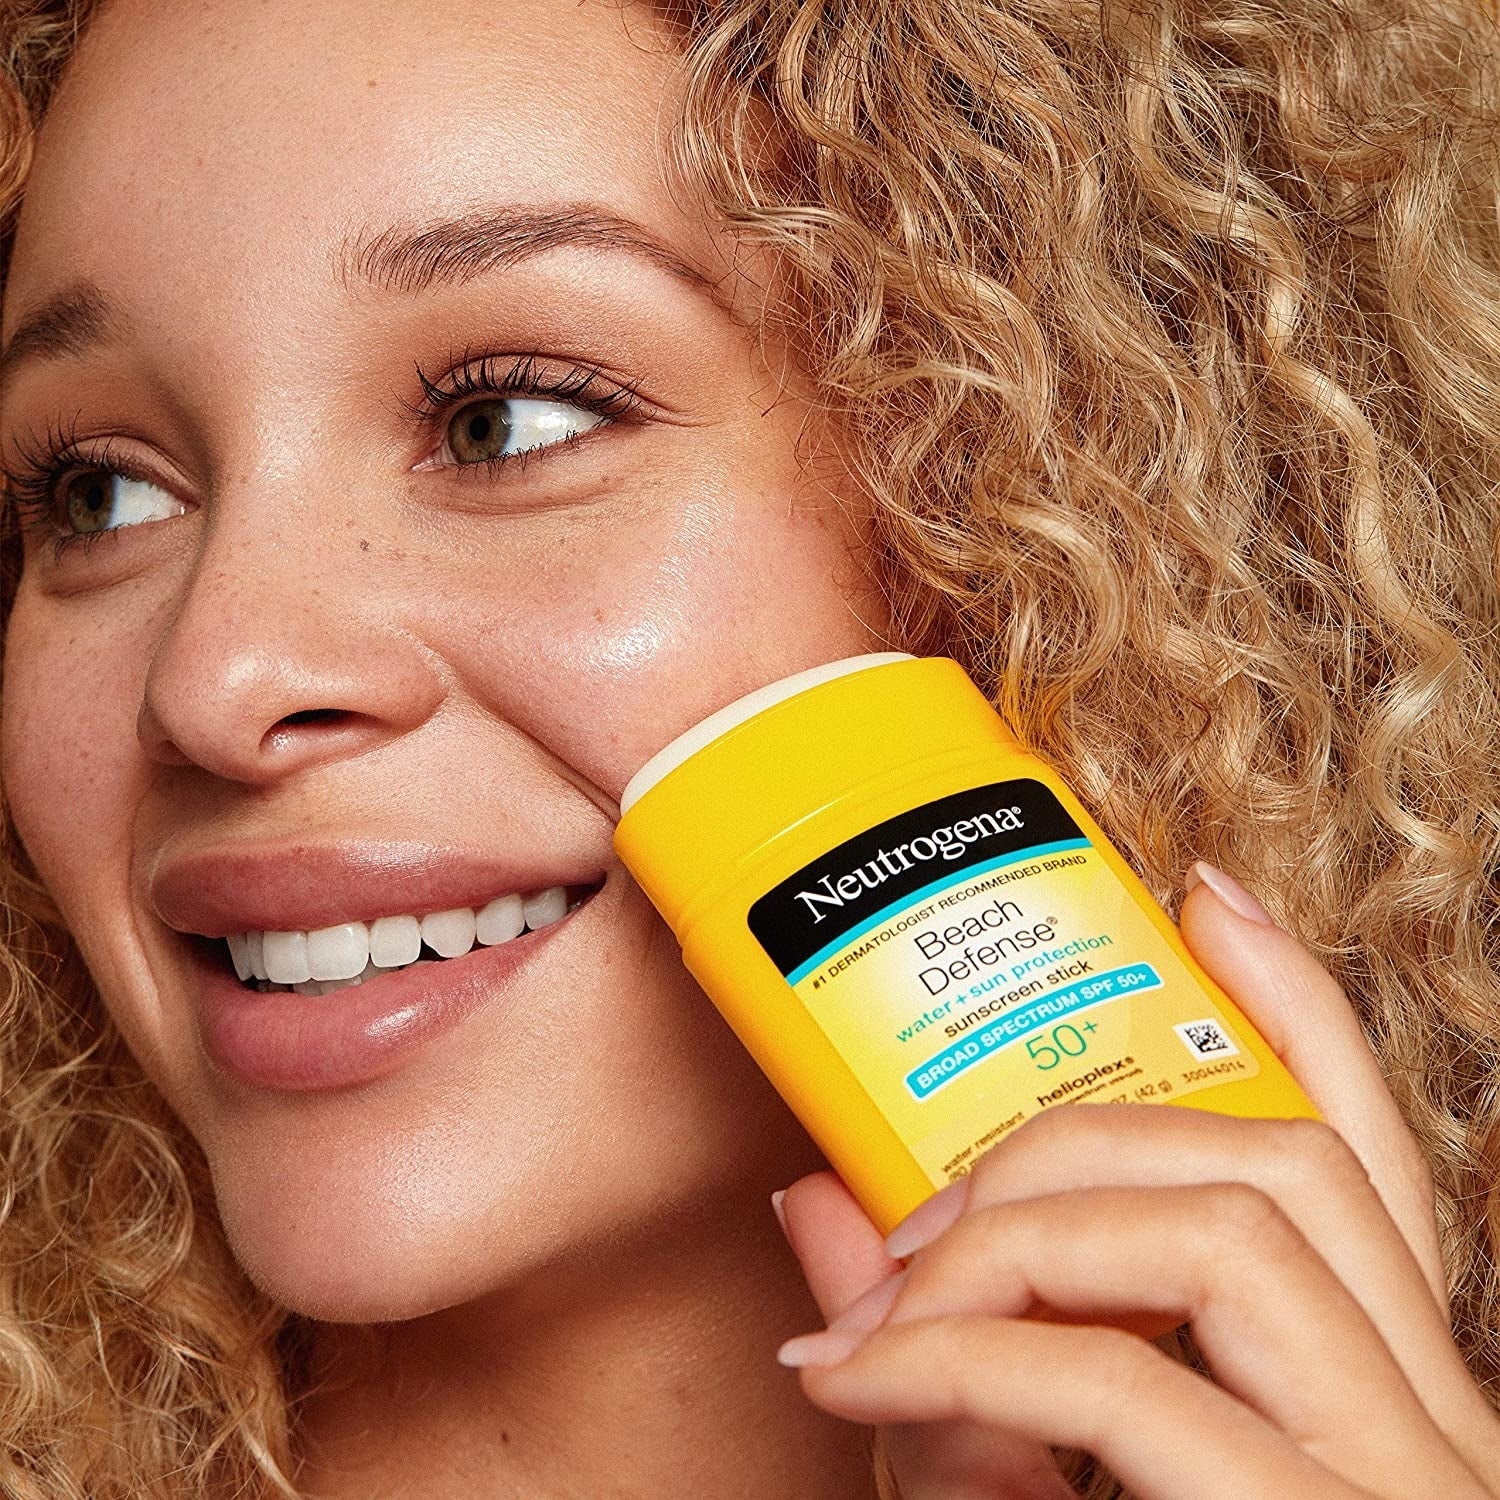 Woman smiling holding Neutrogena sunscreen, suggesting product for shopping